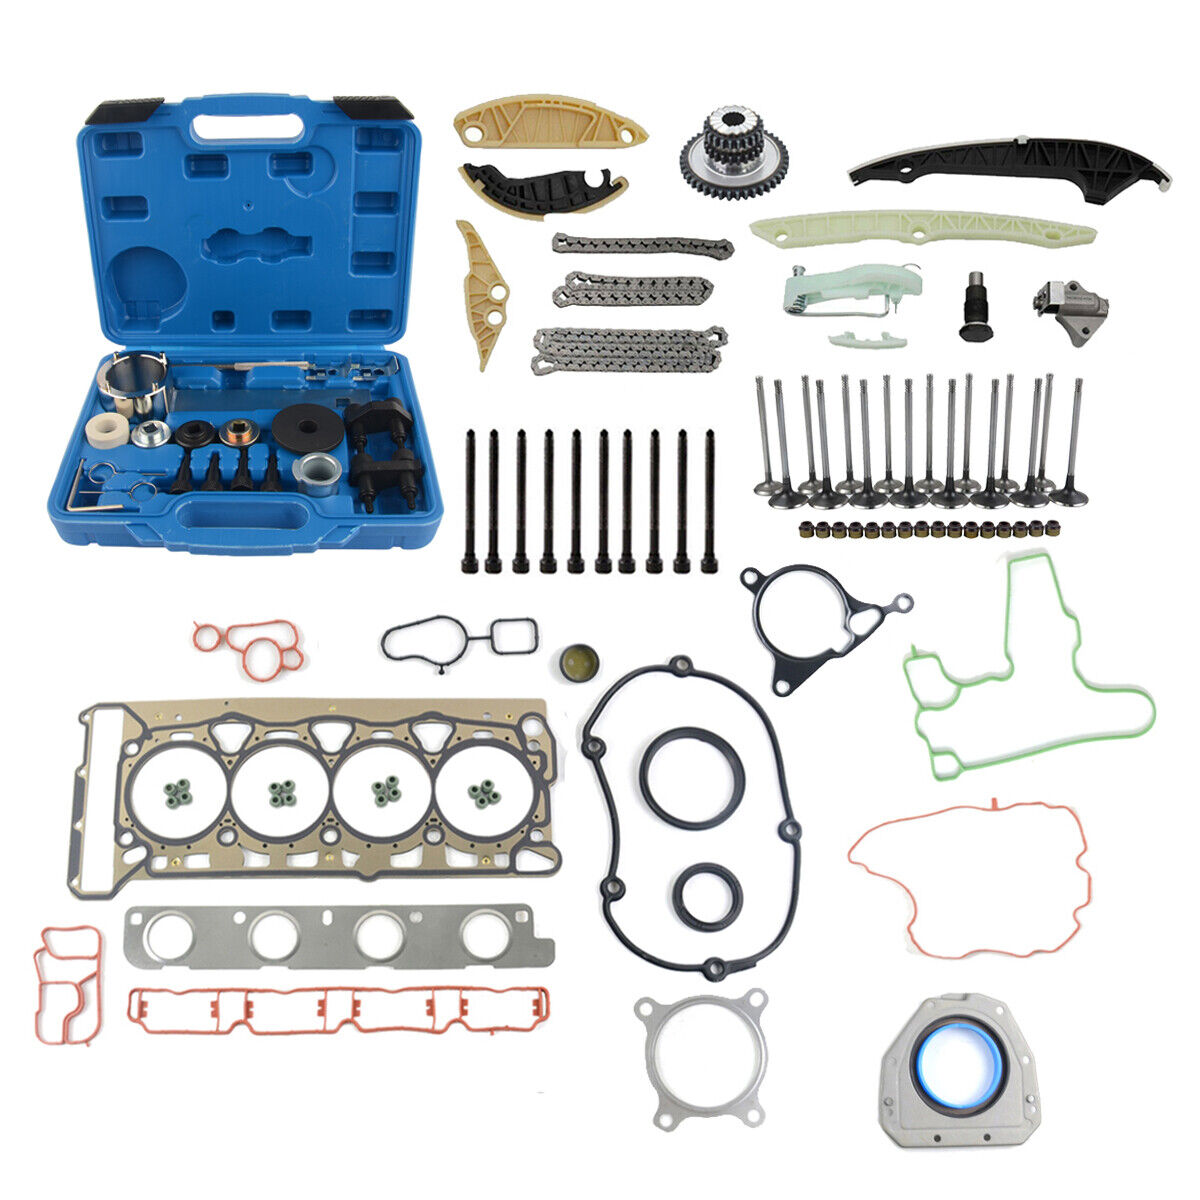 Timing Chain & Tool Kit For Volkswagen GTI Jetta Beetle Audi A4 2.0 TFSI DOHC